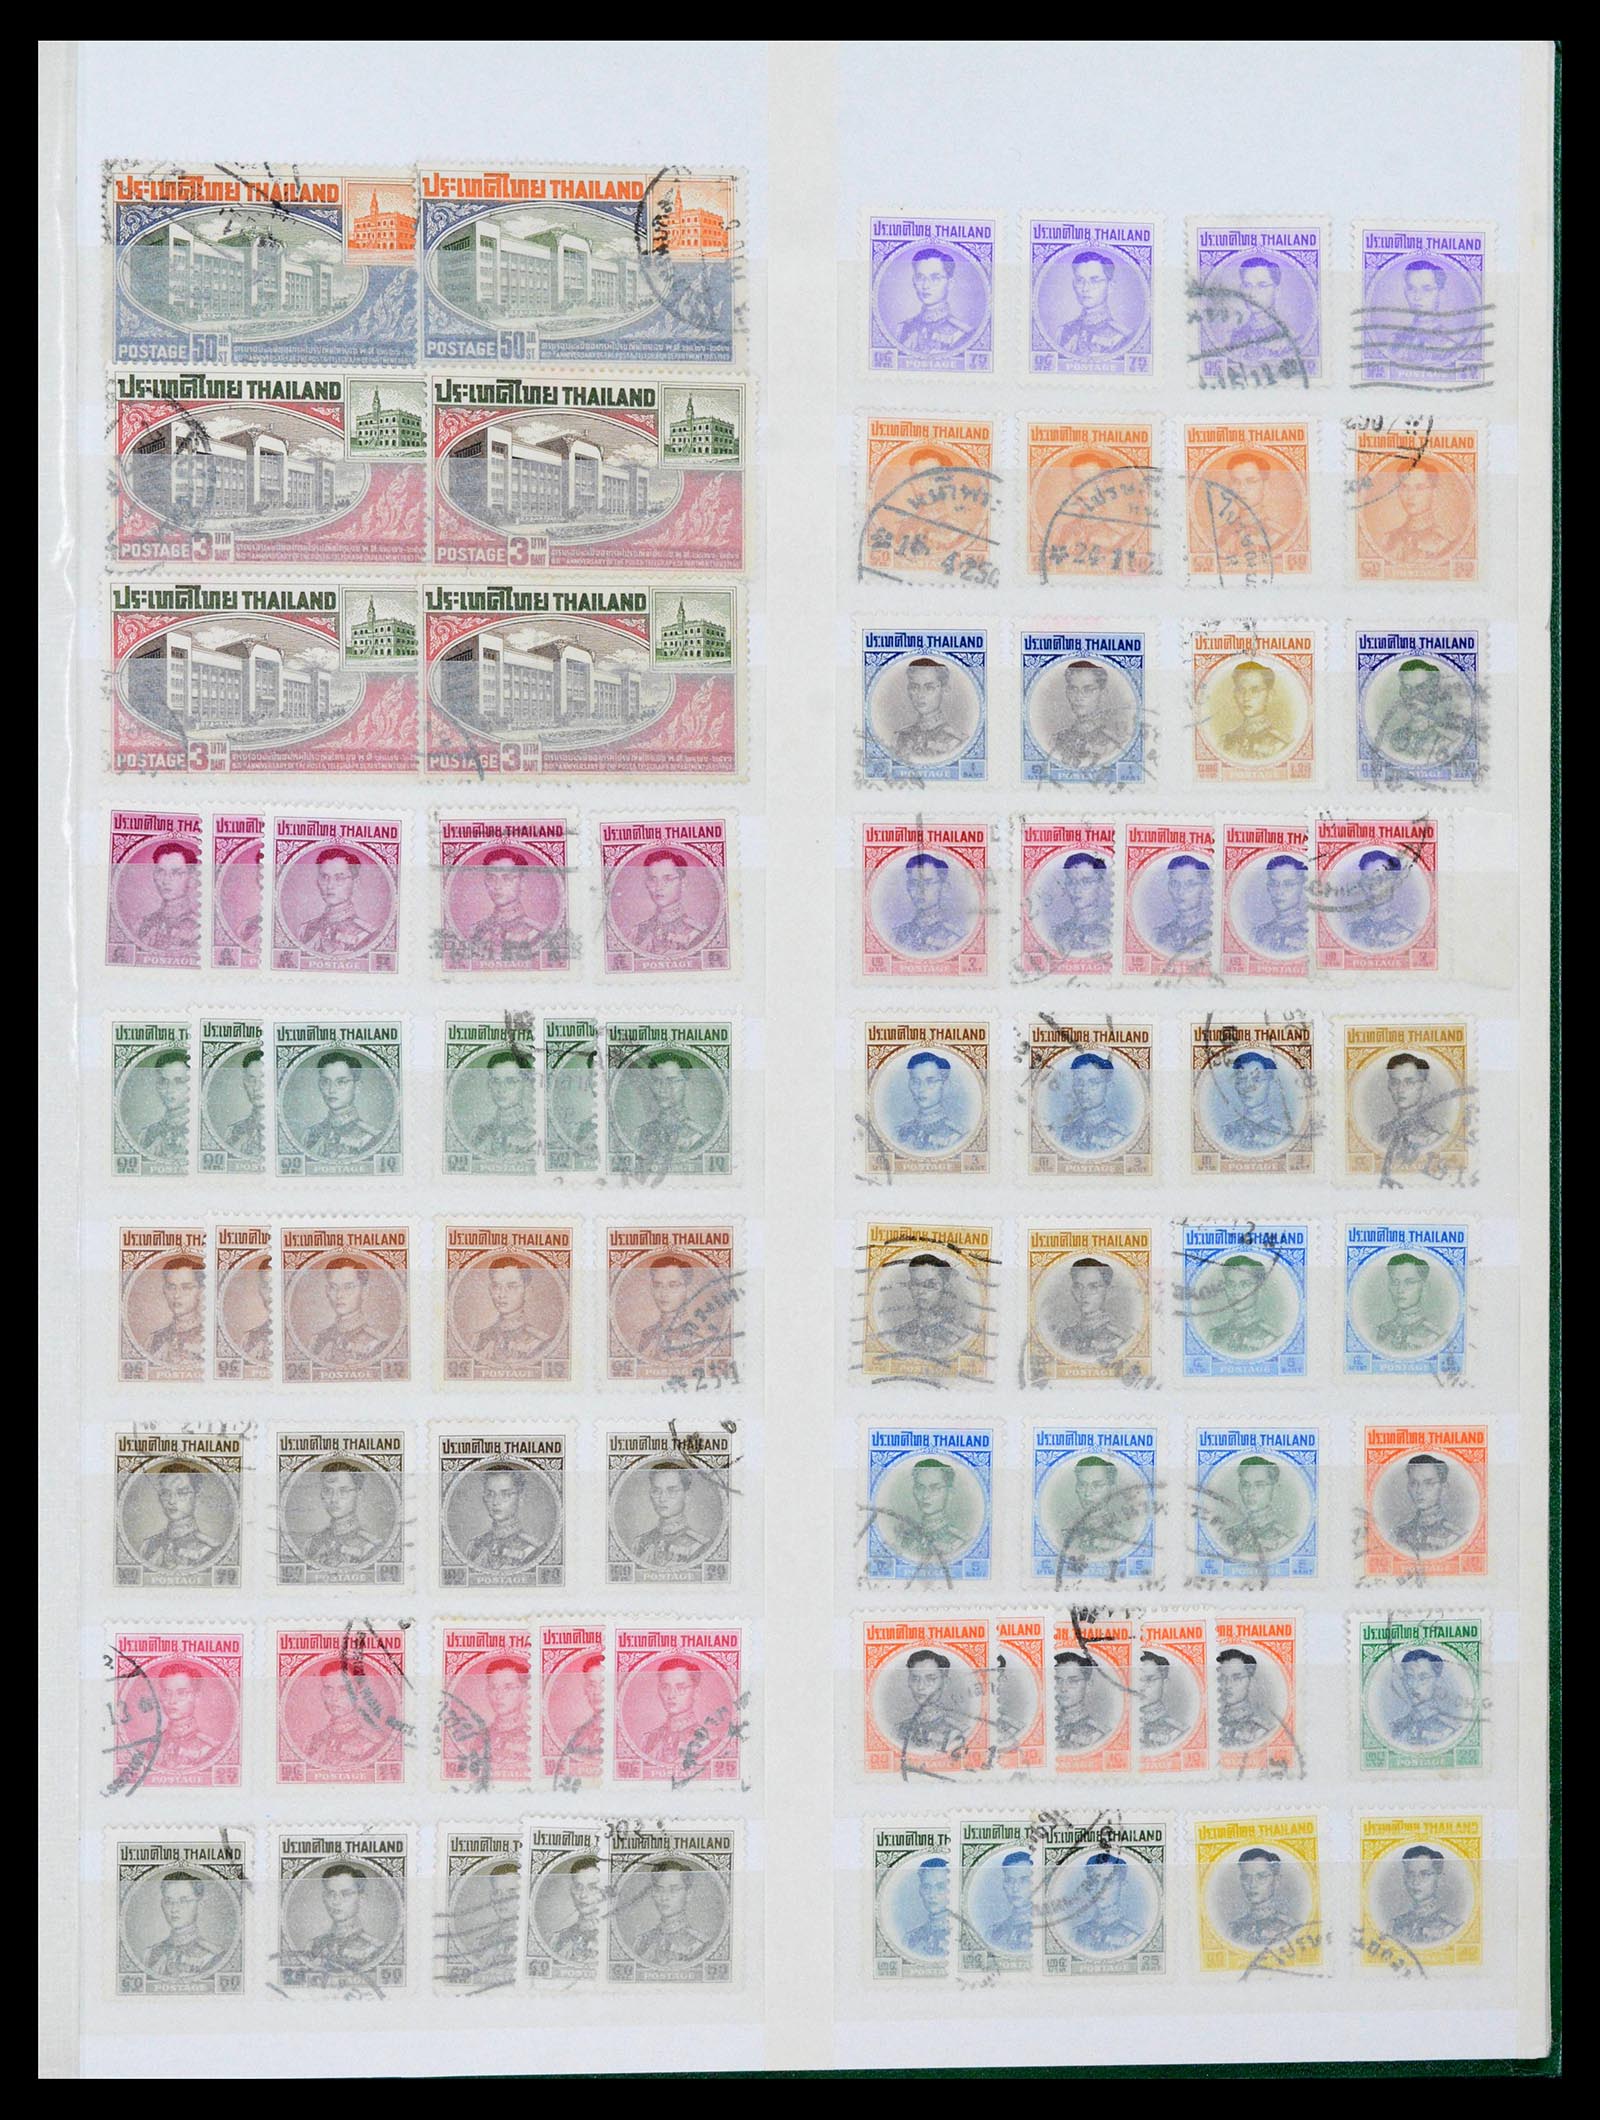 39384 0025 - Stamp collection 39384 Thailand 1883-2014.